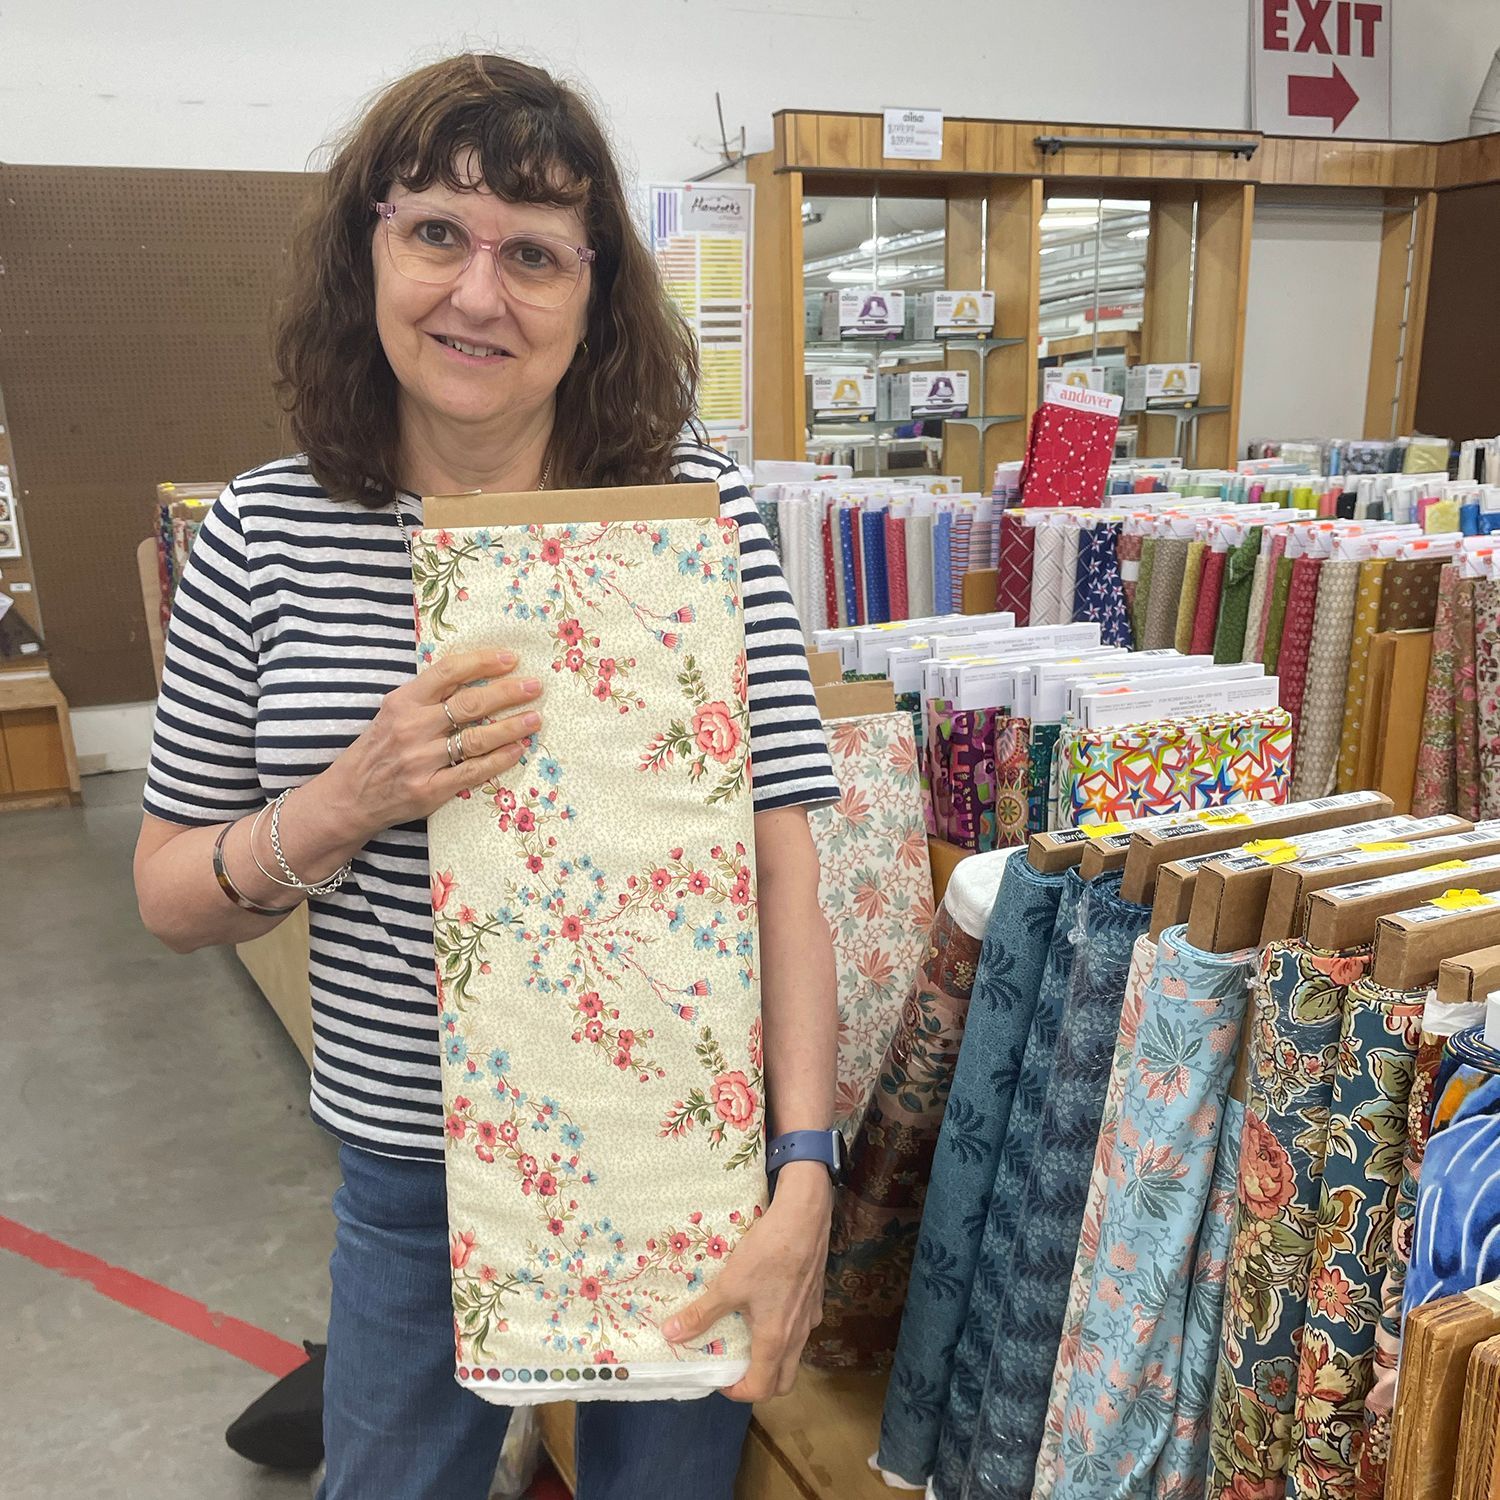 World's largest retail selection of premium cotton fabrics: world record in Paducah, Kentucky